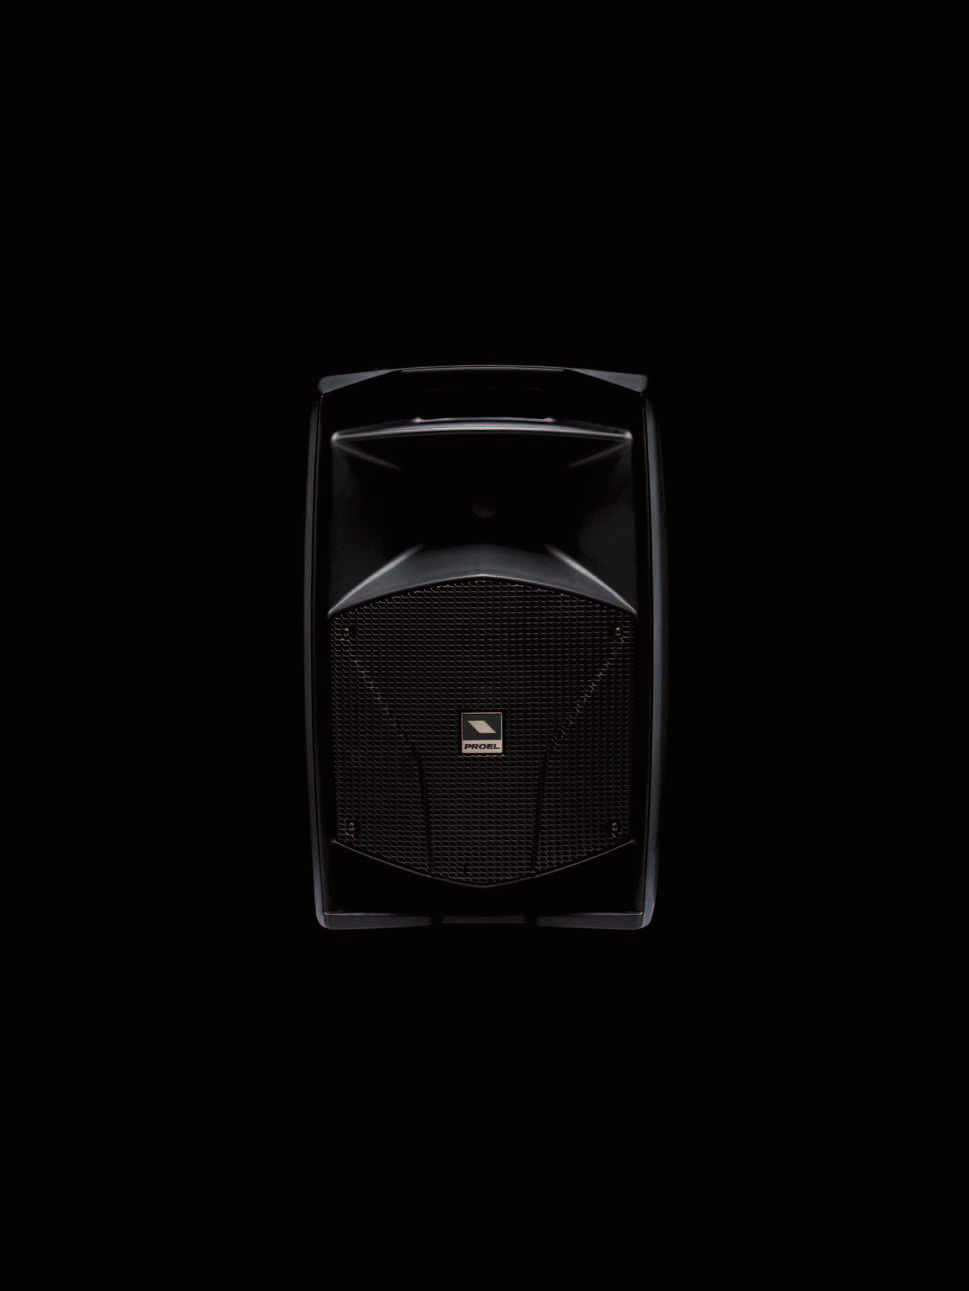 V SERIES Loudspeaker Systems ALUE in PERFORMANCE the proven quality of PROEL sound in powerful and efficient loudspeaker systems ALUE in ENGINEERING lightweight